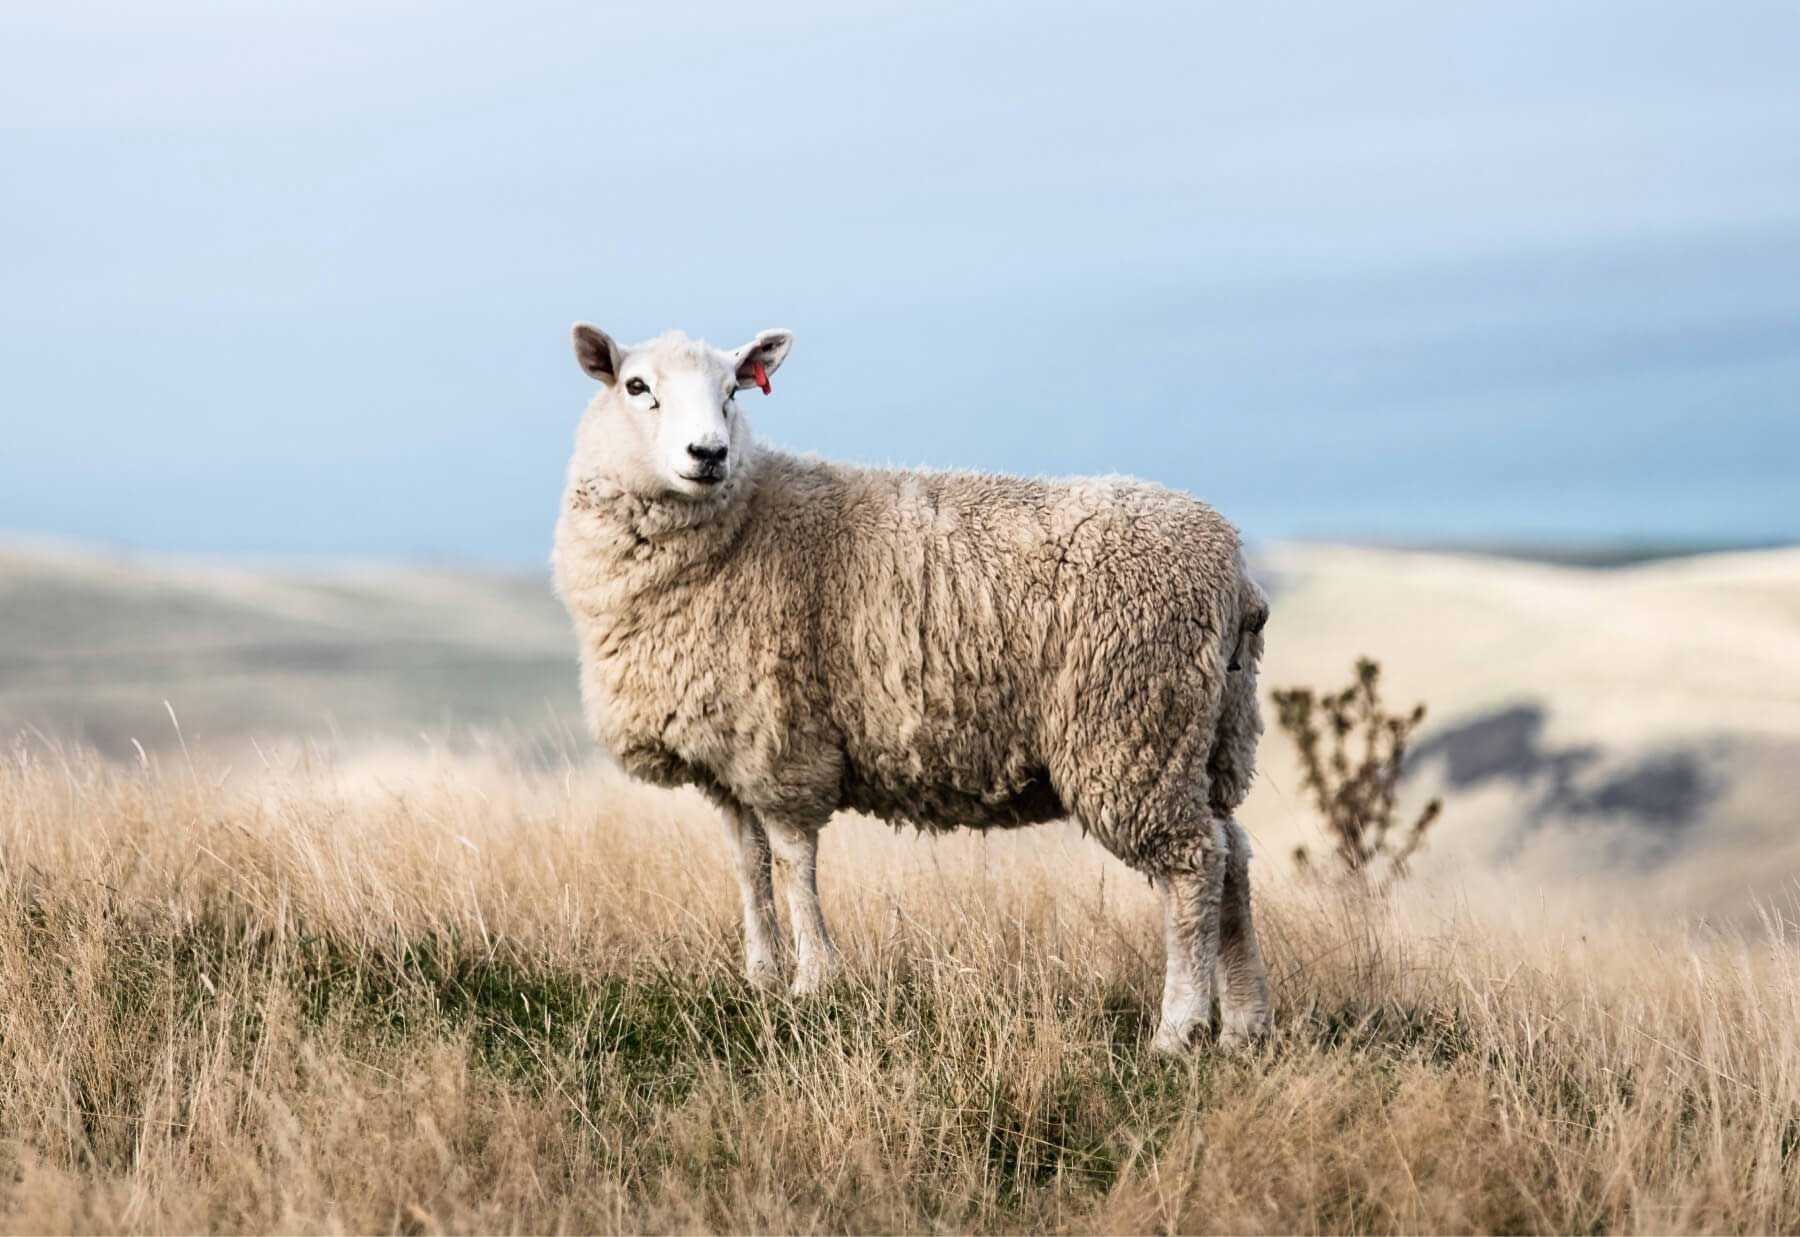 Photo of a sheep in a field